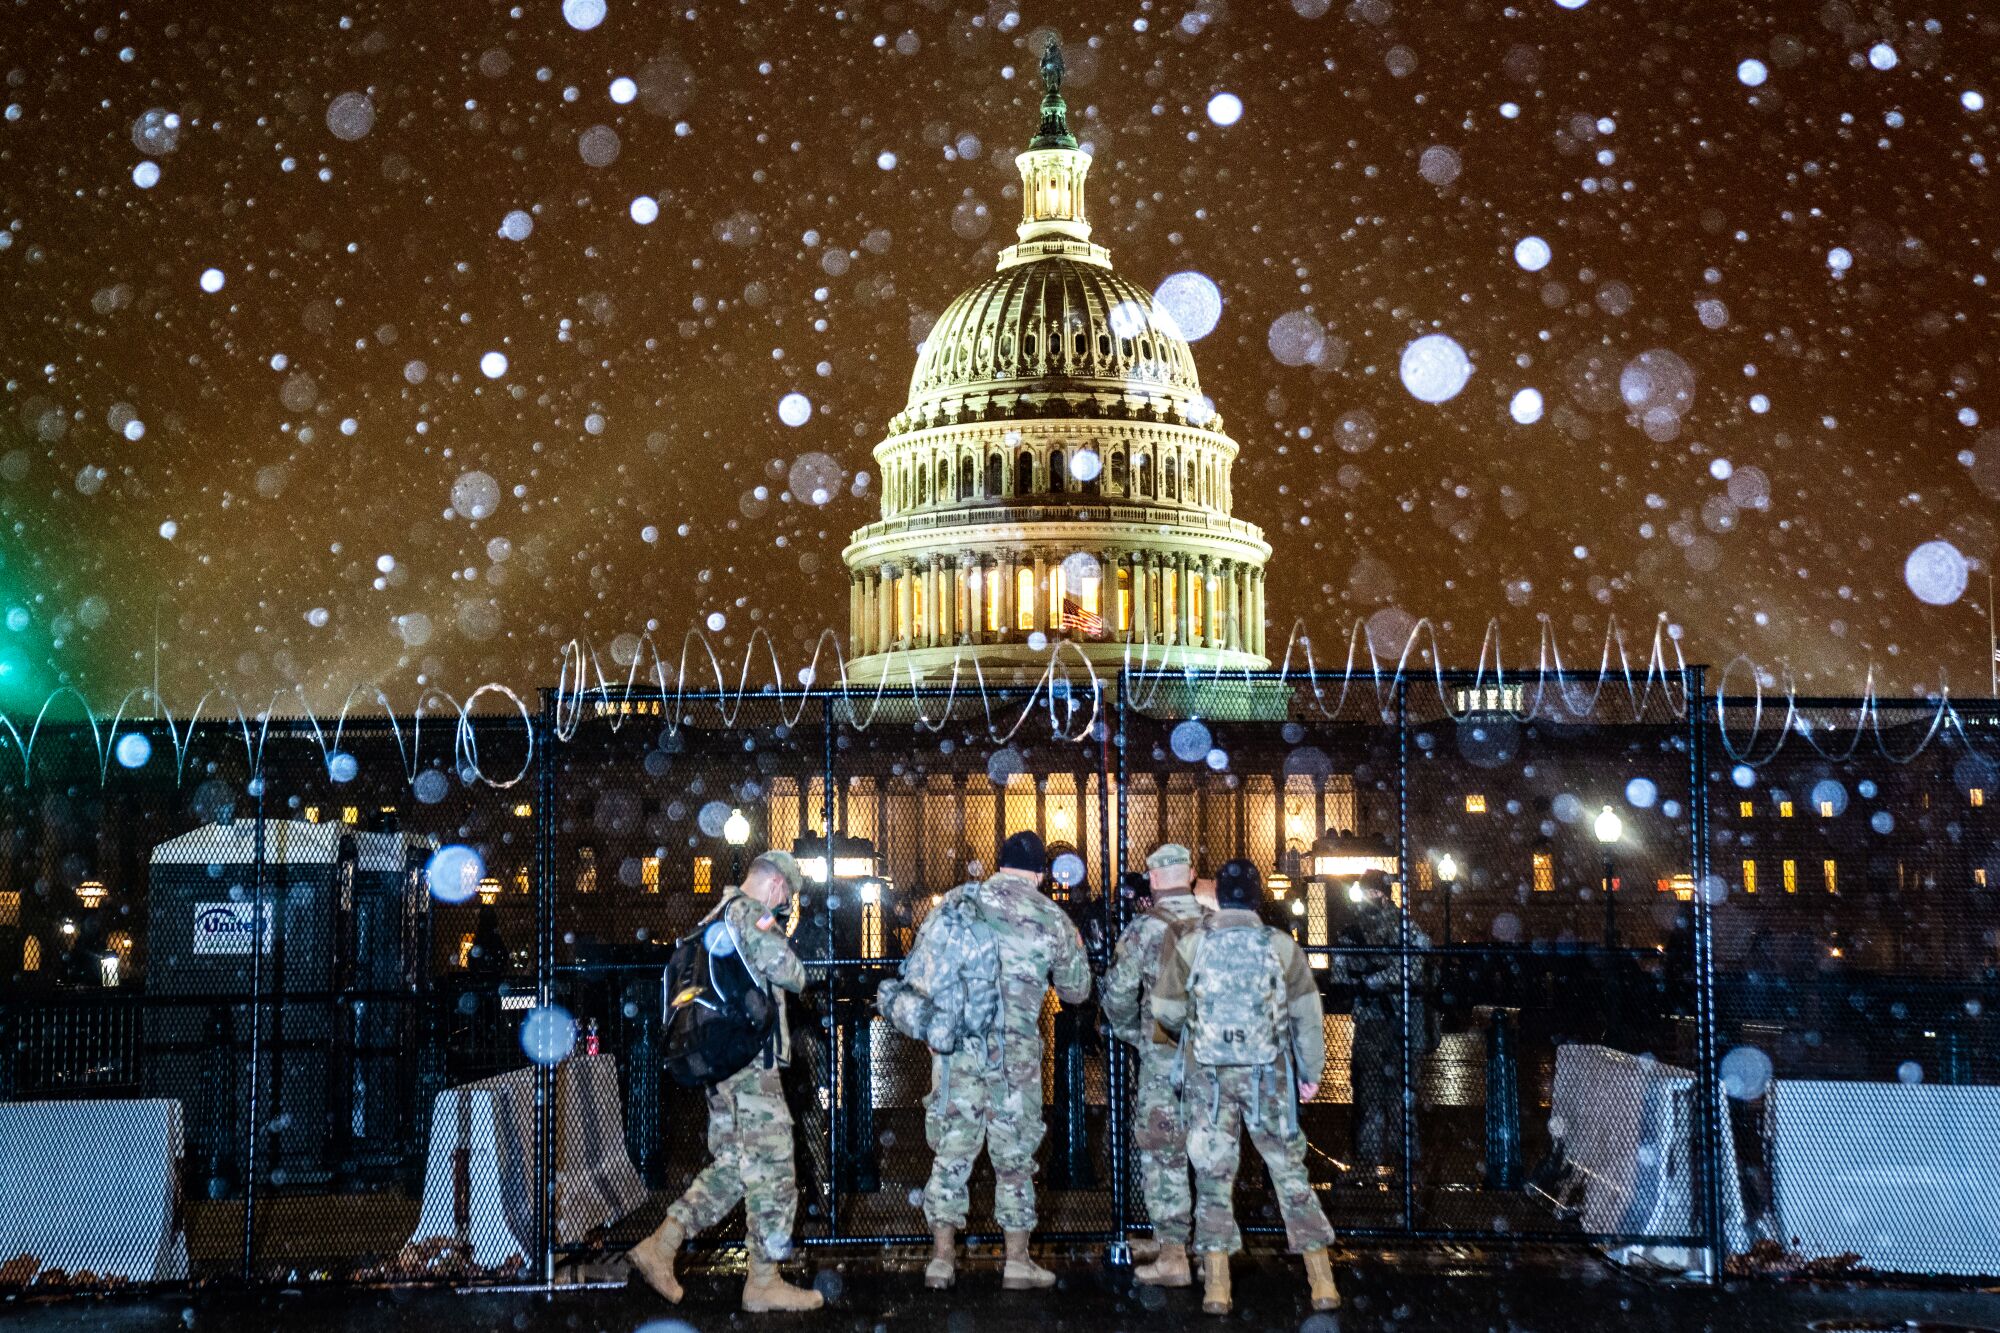 Troops stand outside a gate as snow falls in front of the U.S. Capitol.